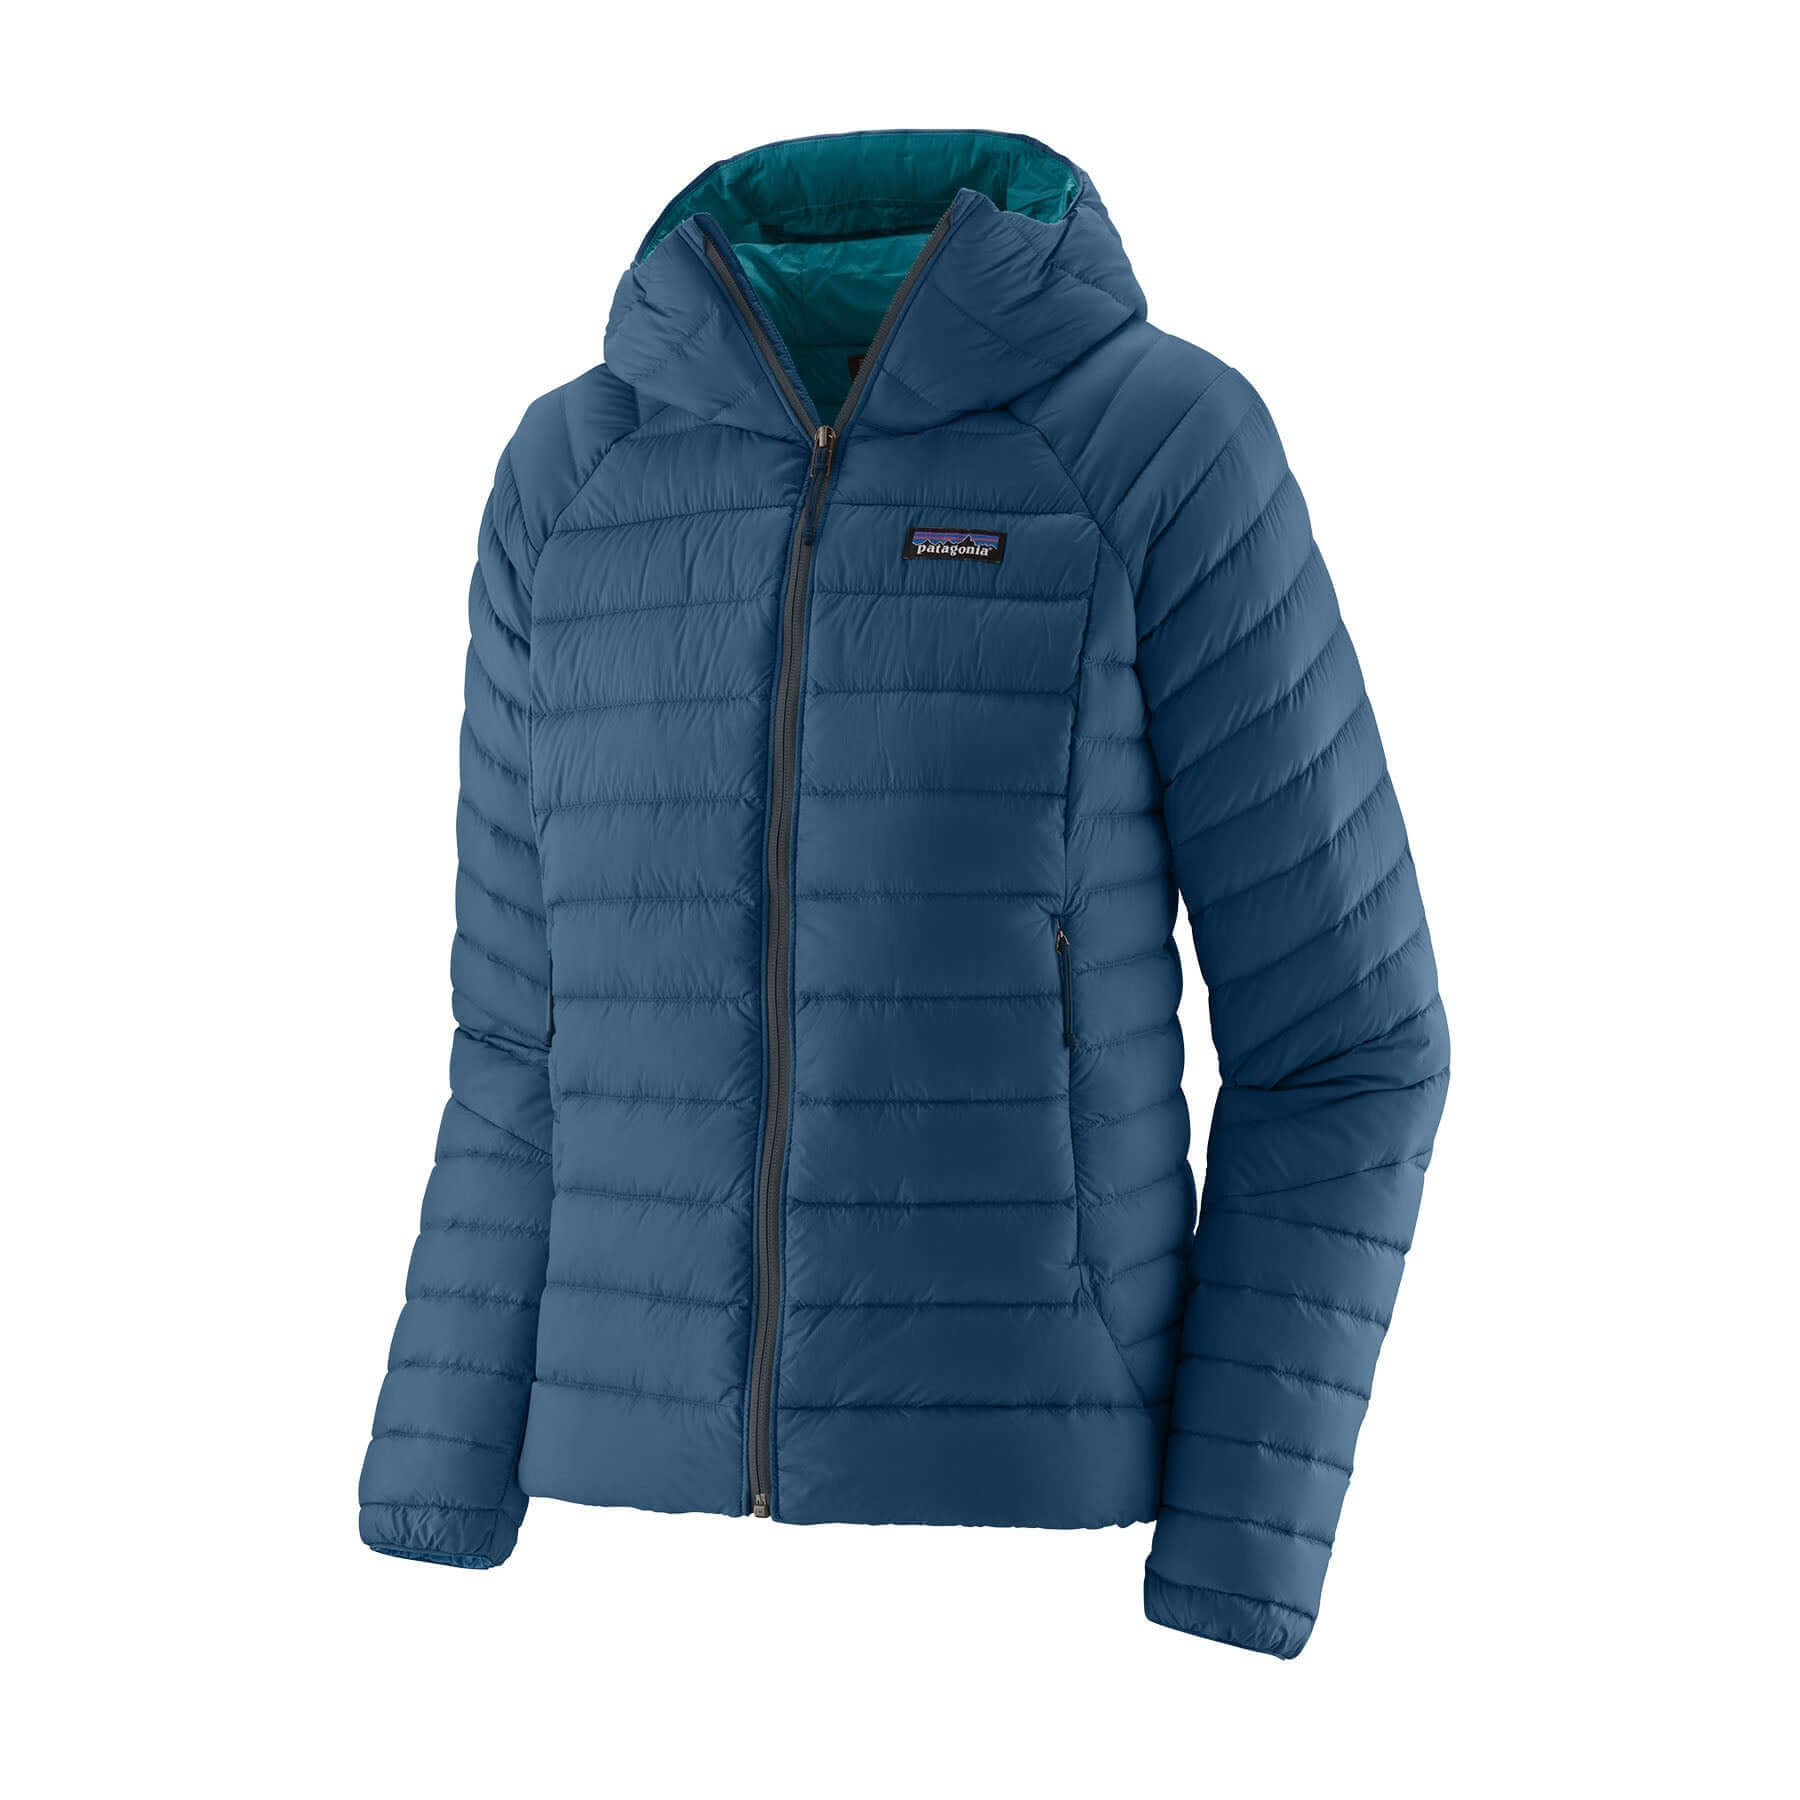 Women's Outdoor Clothing from Patagonia